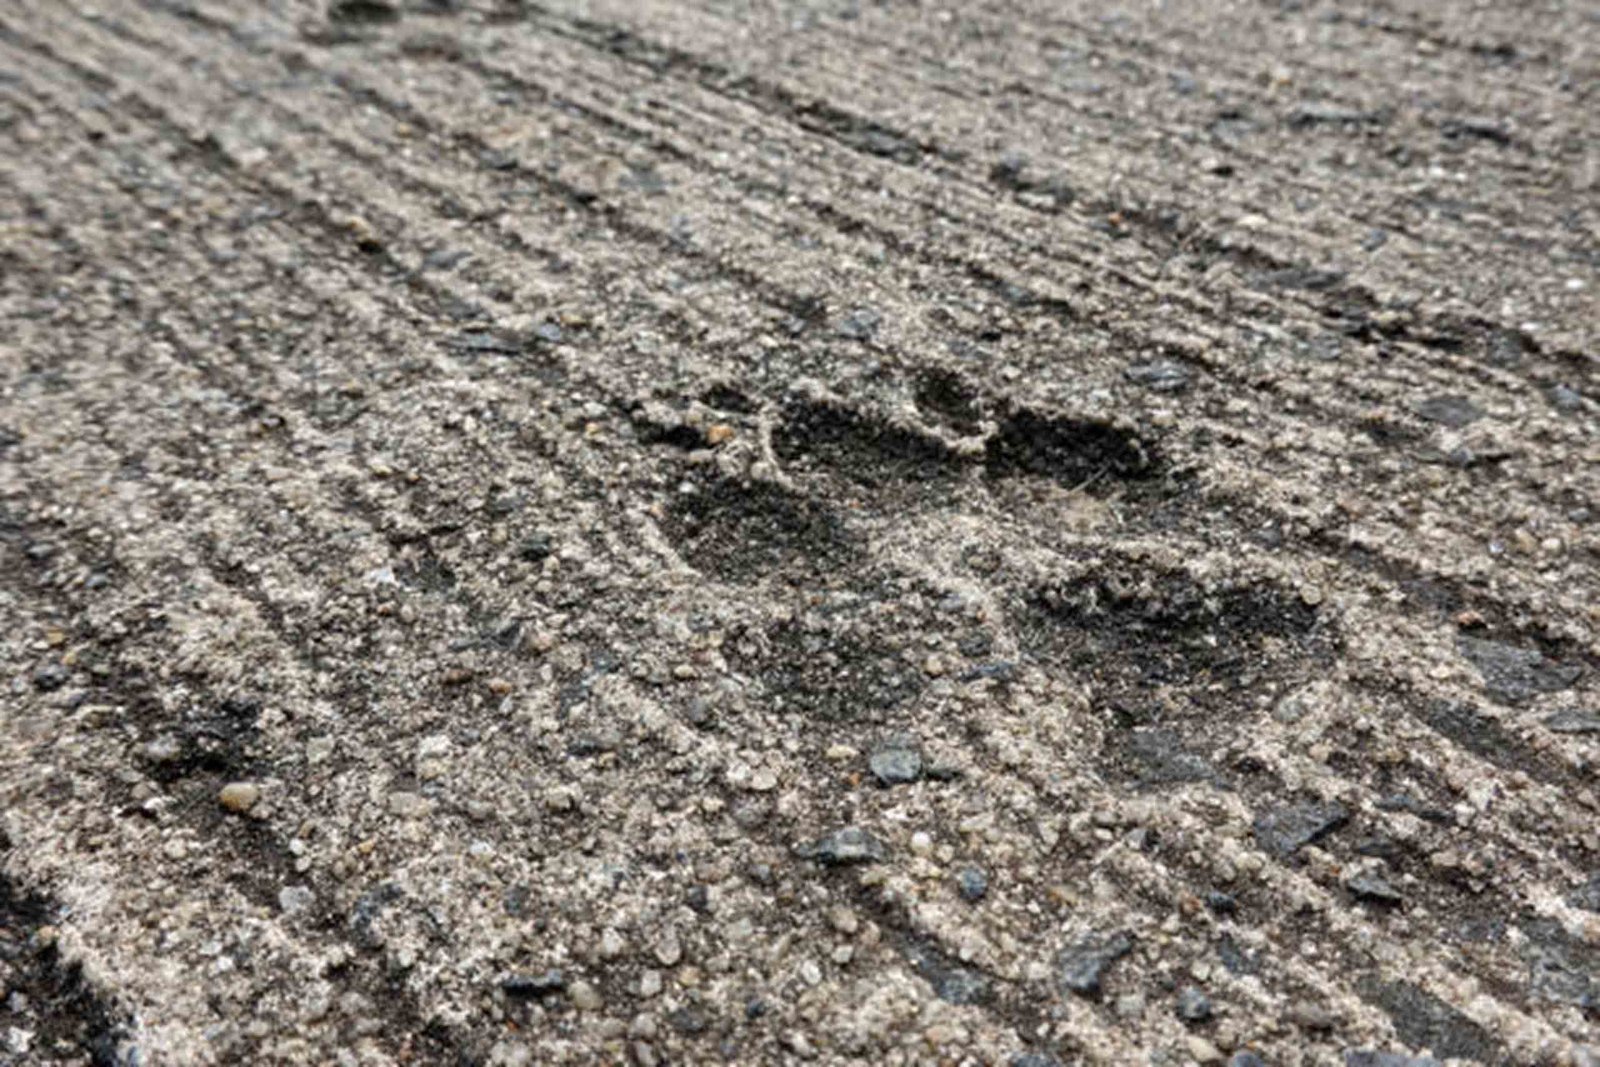 How to protect dogs’ paws on concrete